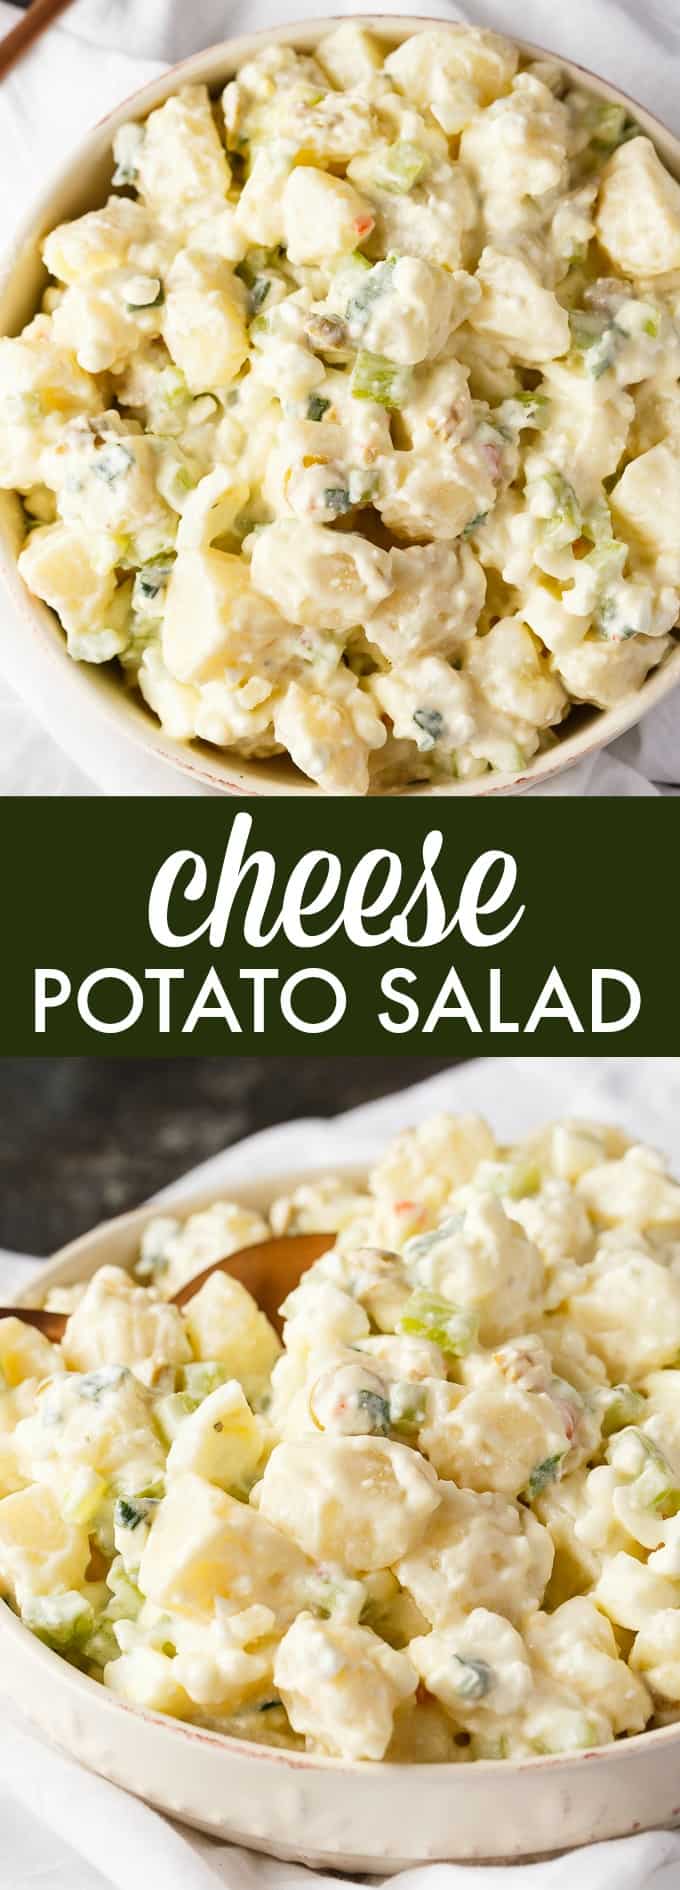 Cheese Potato Salad - Who doesn't love cheese?! Add some to this BBQ side dish with hard boiled eggs, green olives, celery, and green onions.